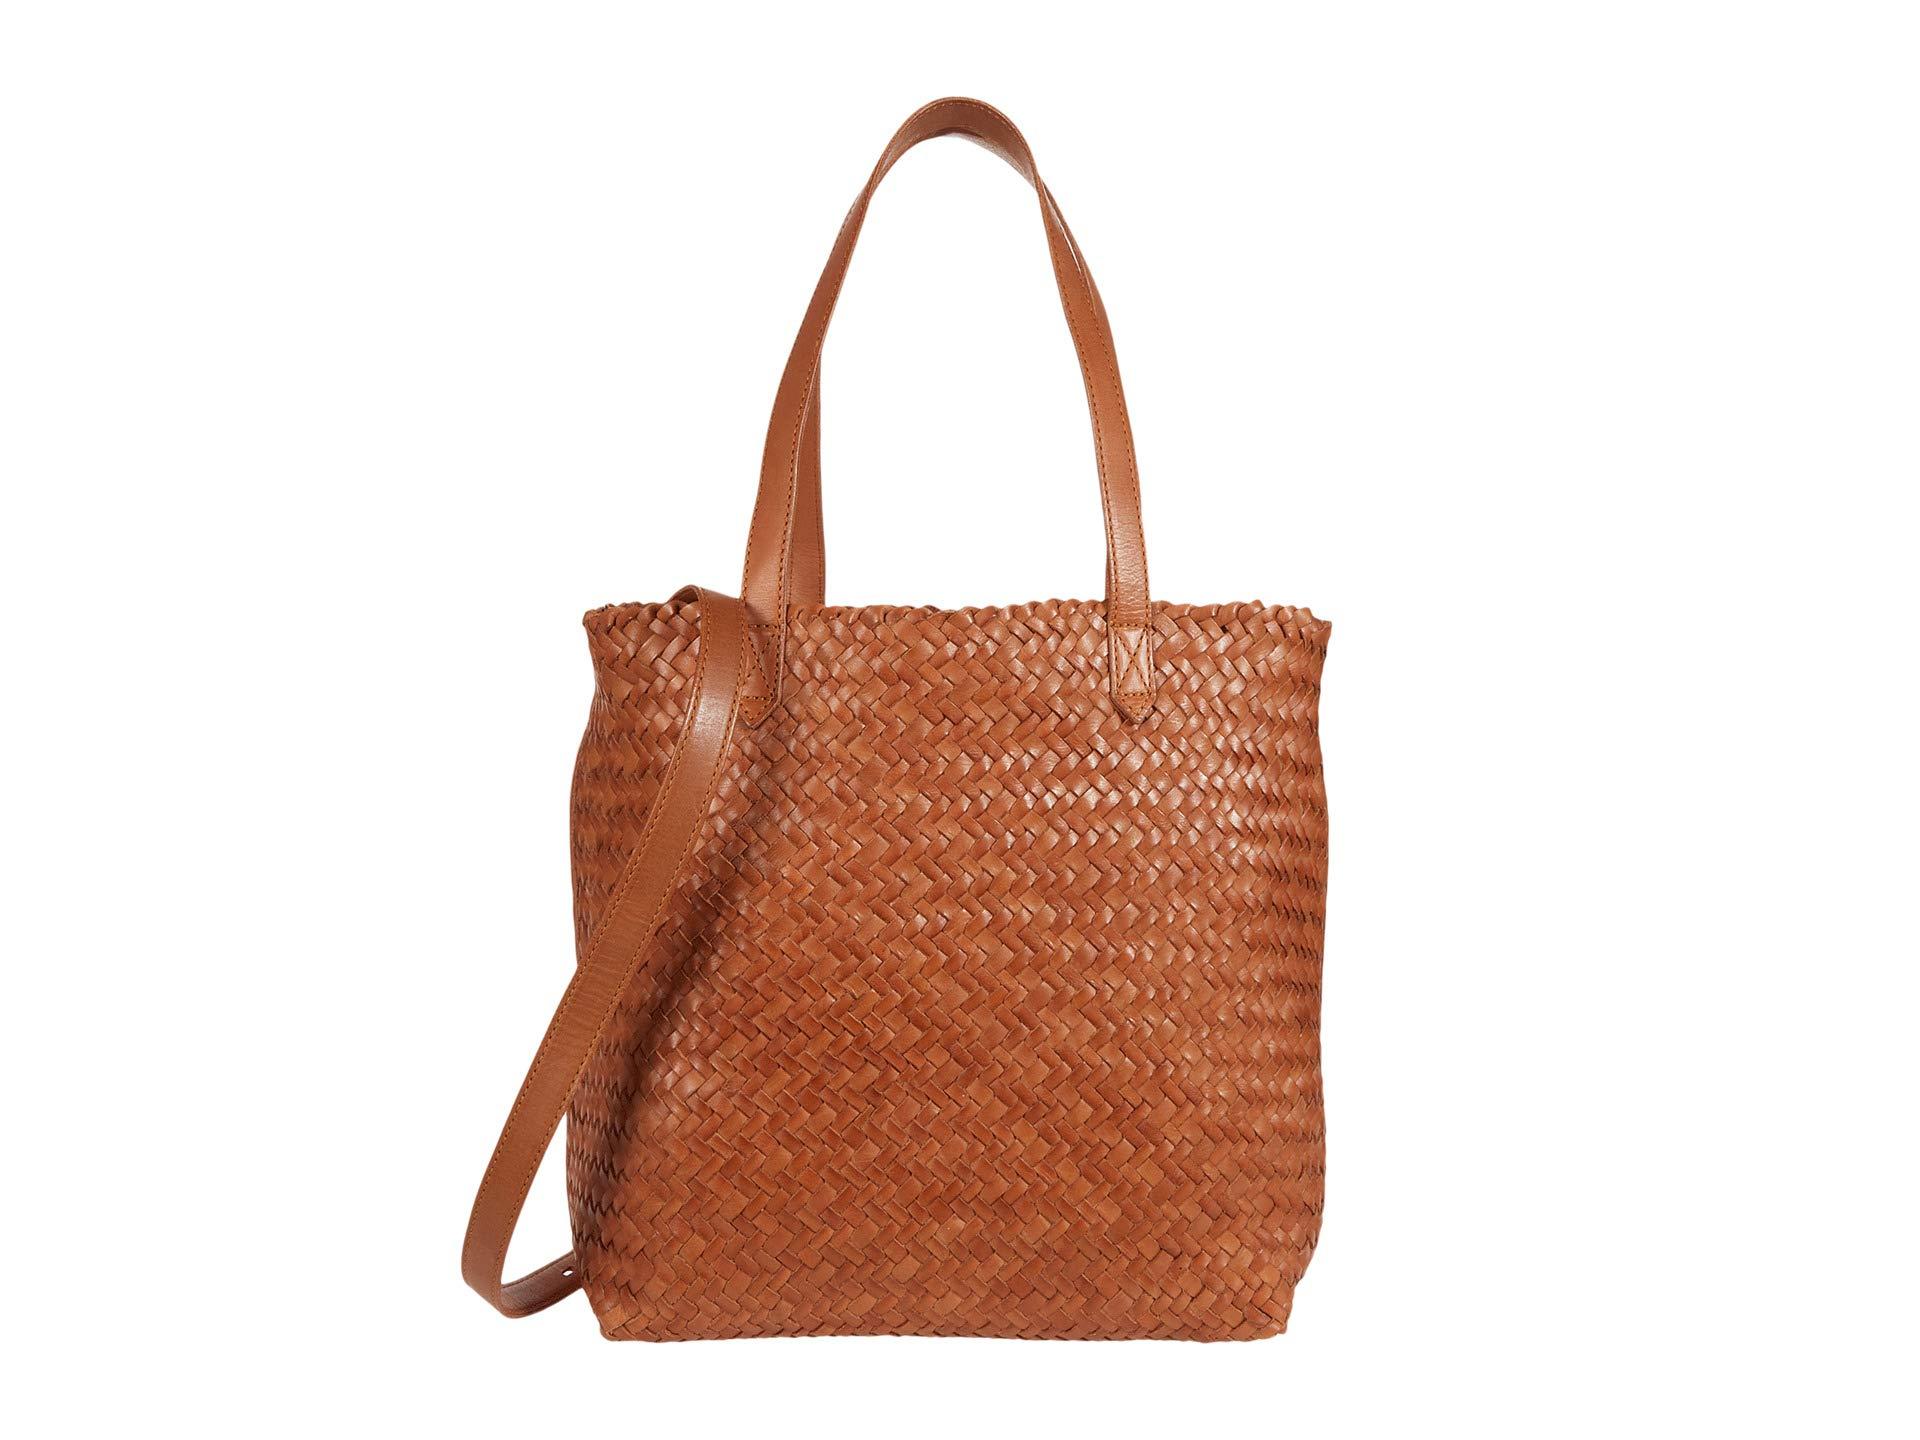 Madewell Leather Medium Transport Tote Woven Edition in Tan (Brown) - Lyst